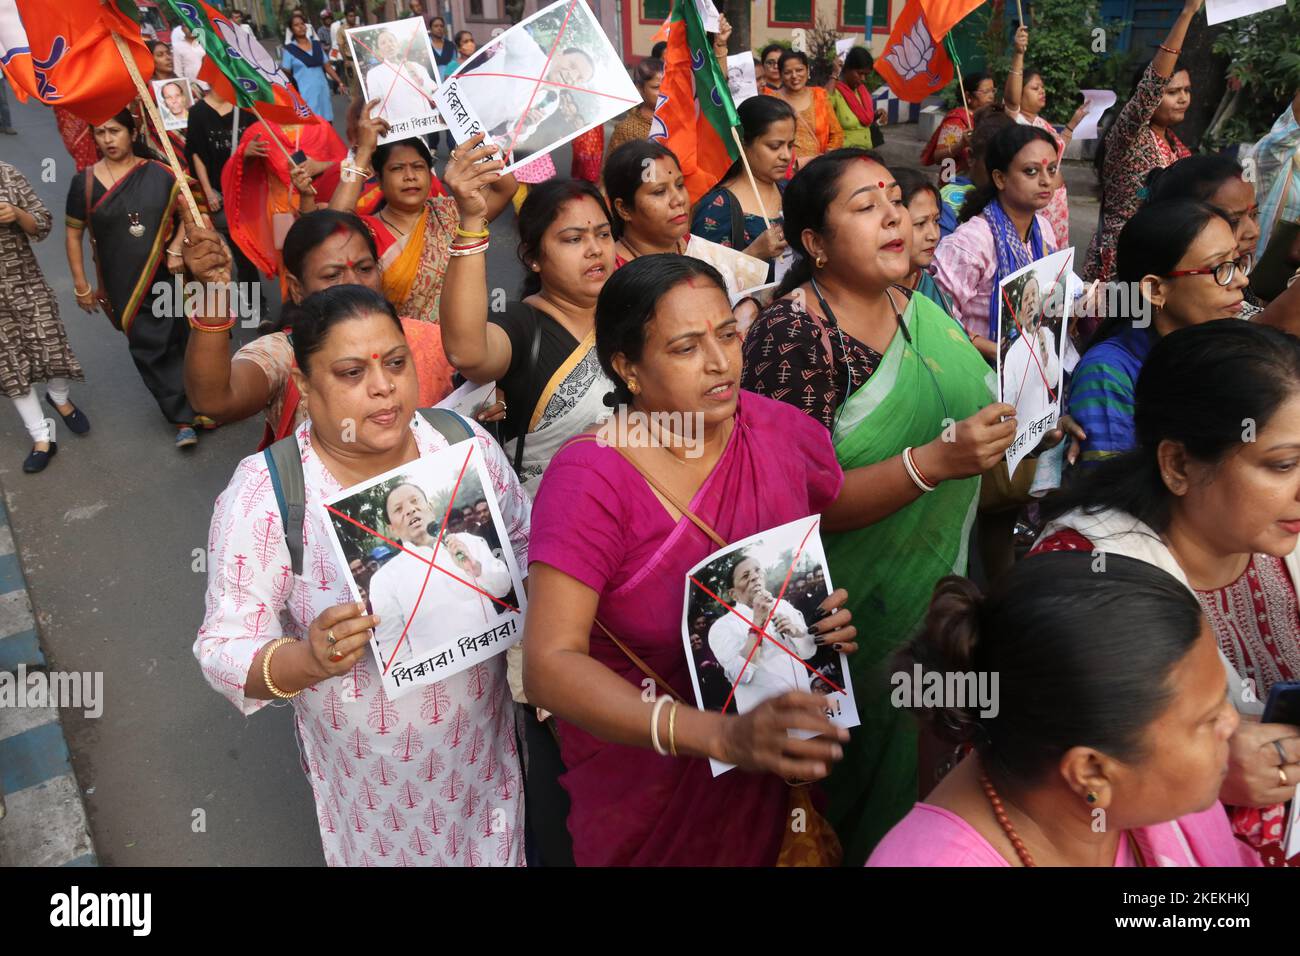 TMC MP 'amused' as personal photos shared online: 'Bengal's women